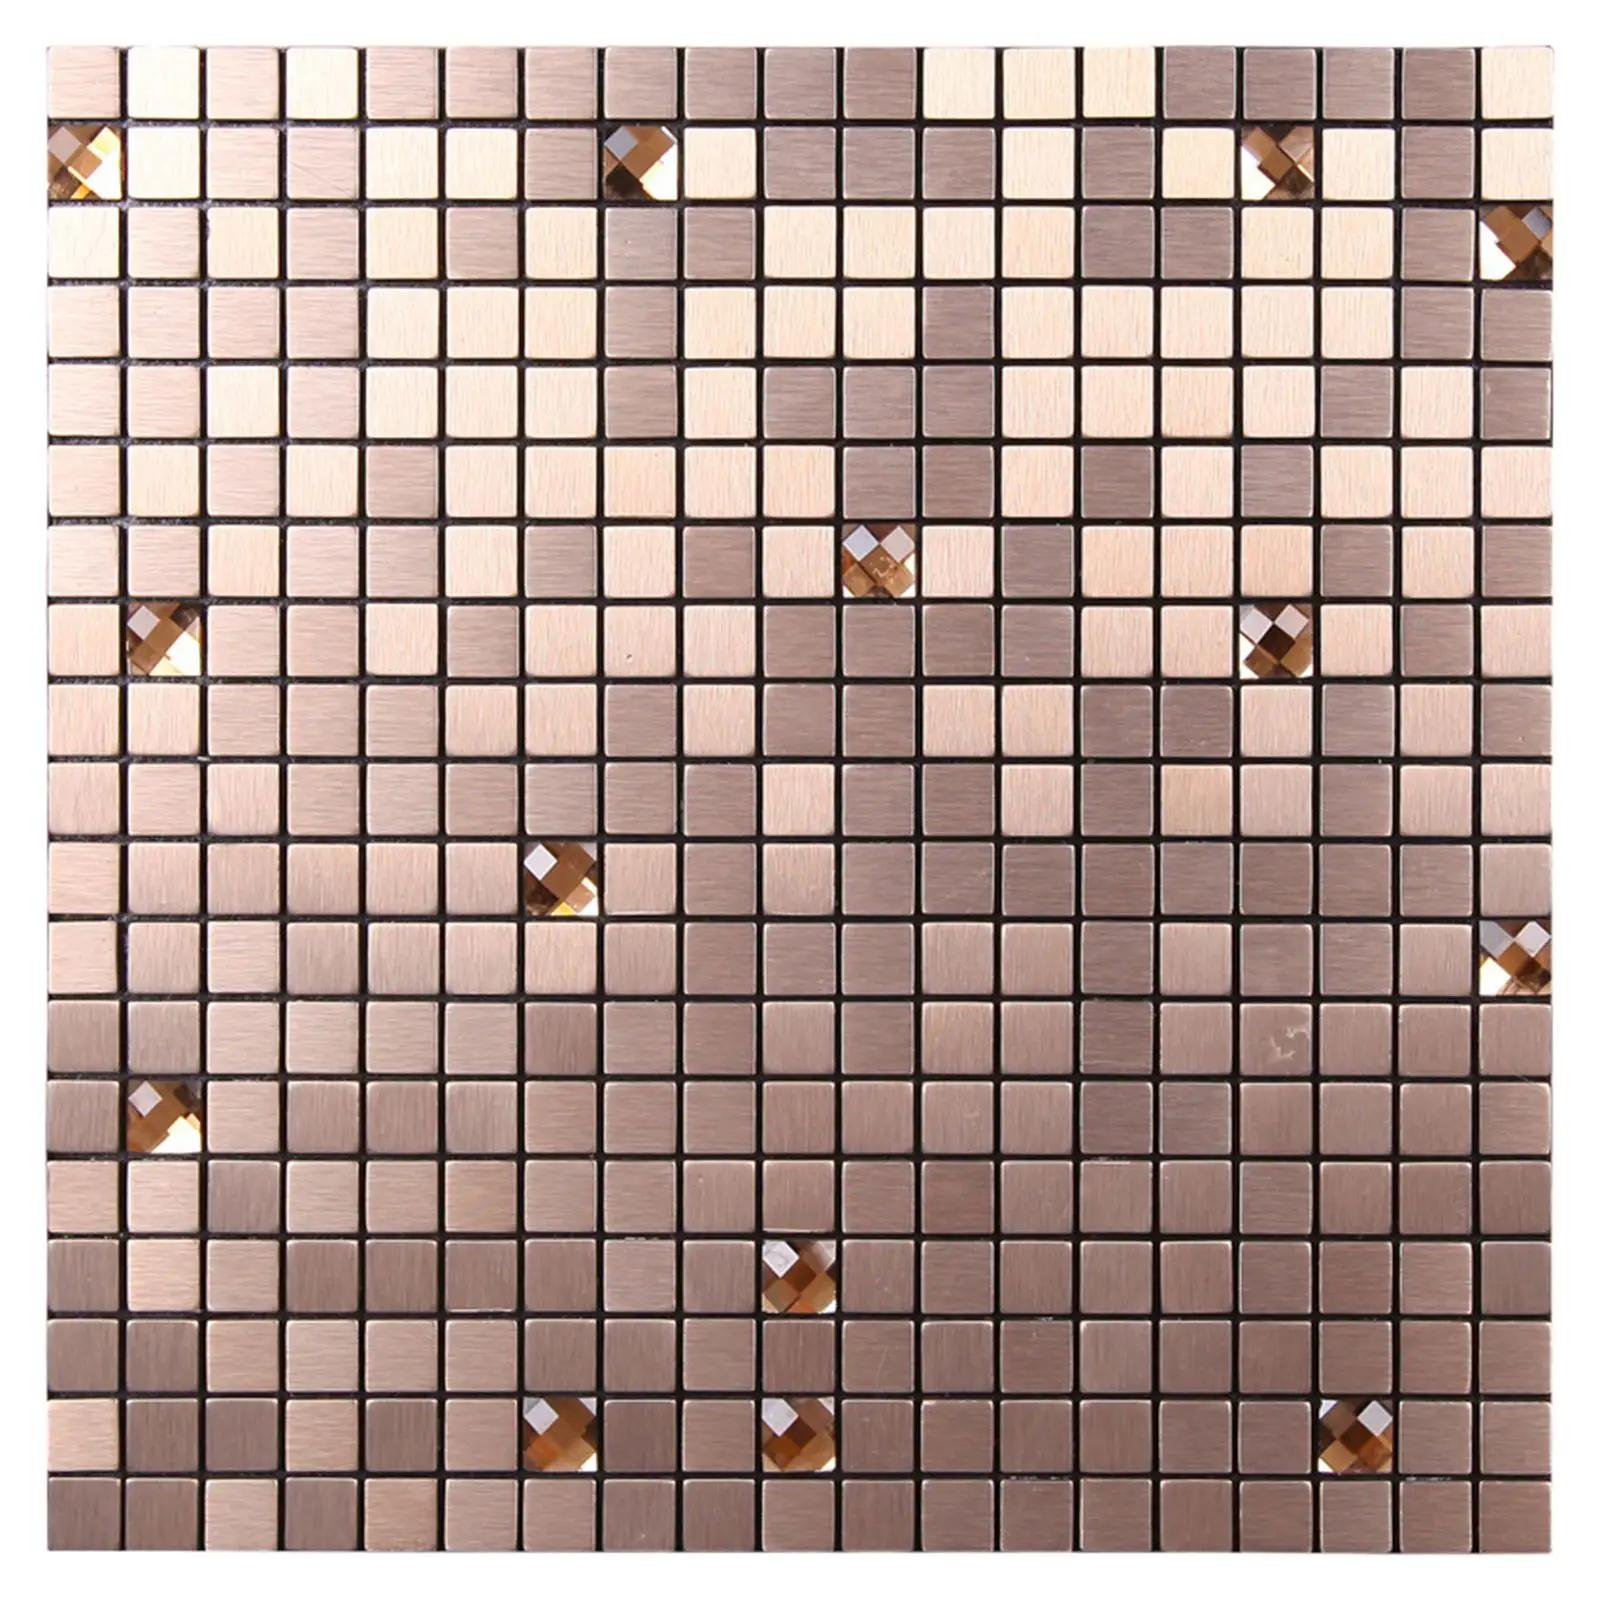 

Home Decoration Self Wall Adhesive Paper Mosaic Backsplash Sticker Decal Kitchen Water-proof Peel And Stick Tile DIY Apparel Sew